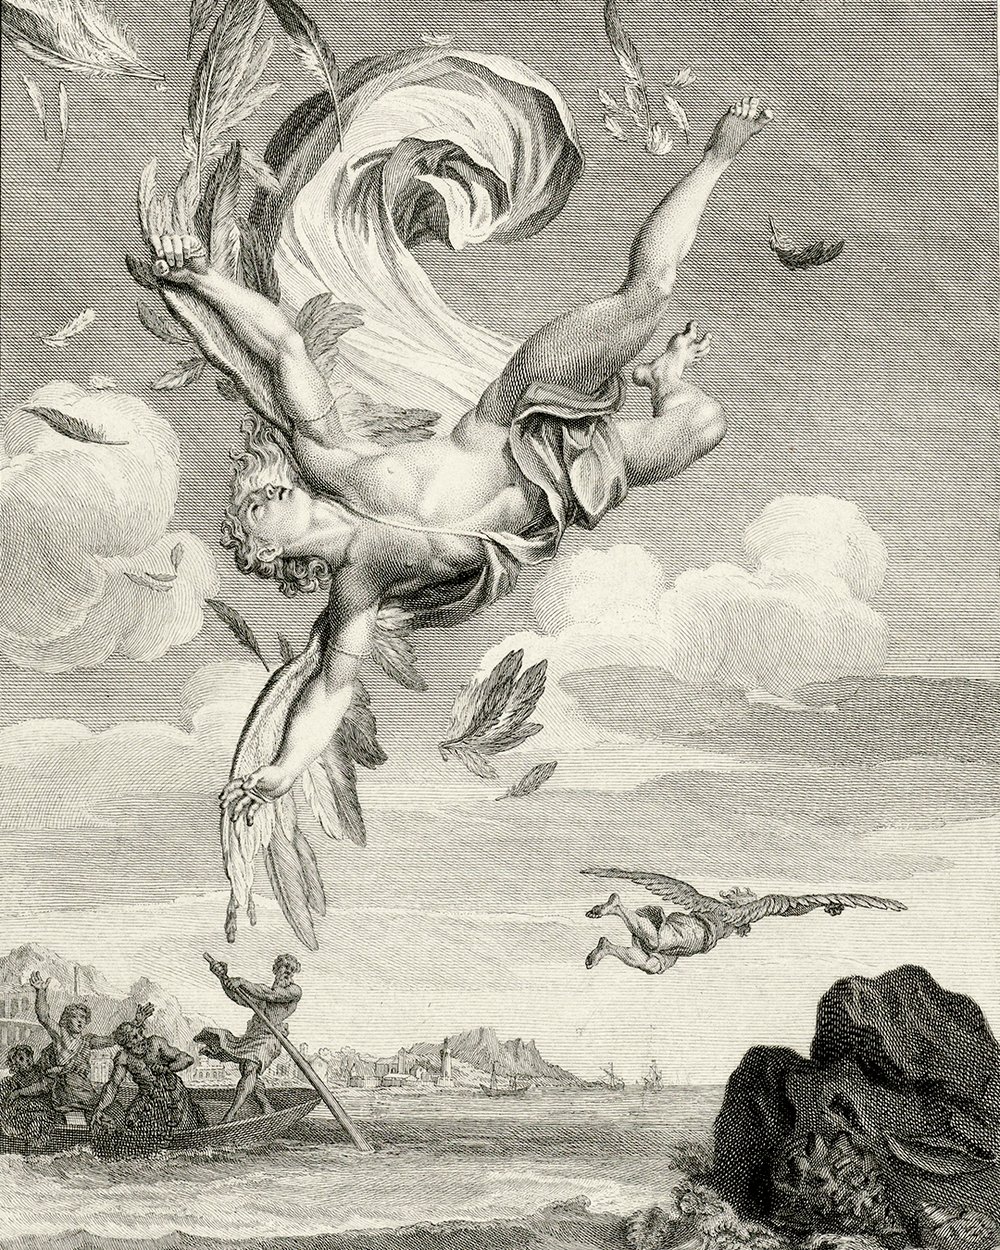 "The Fall of Icarus" (1731)